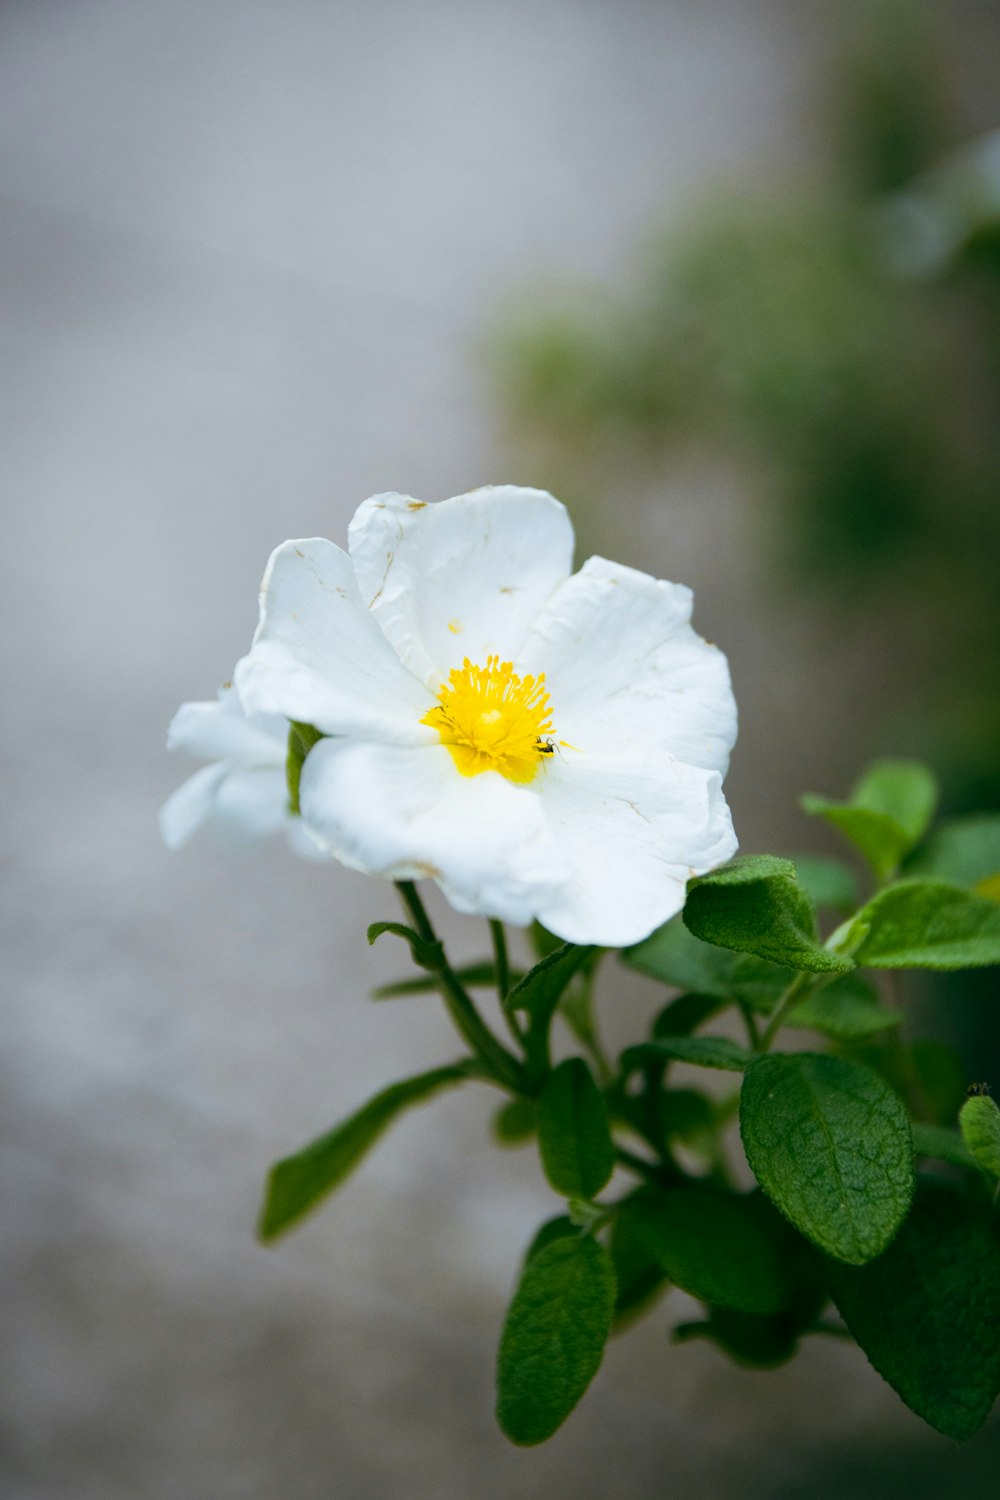 a white flower with a yellow center in a pot